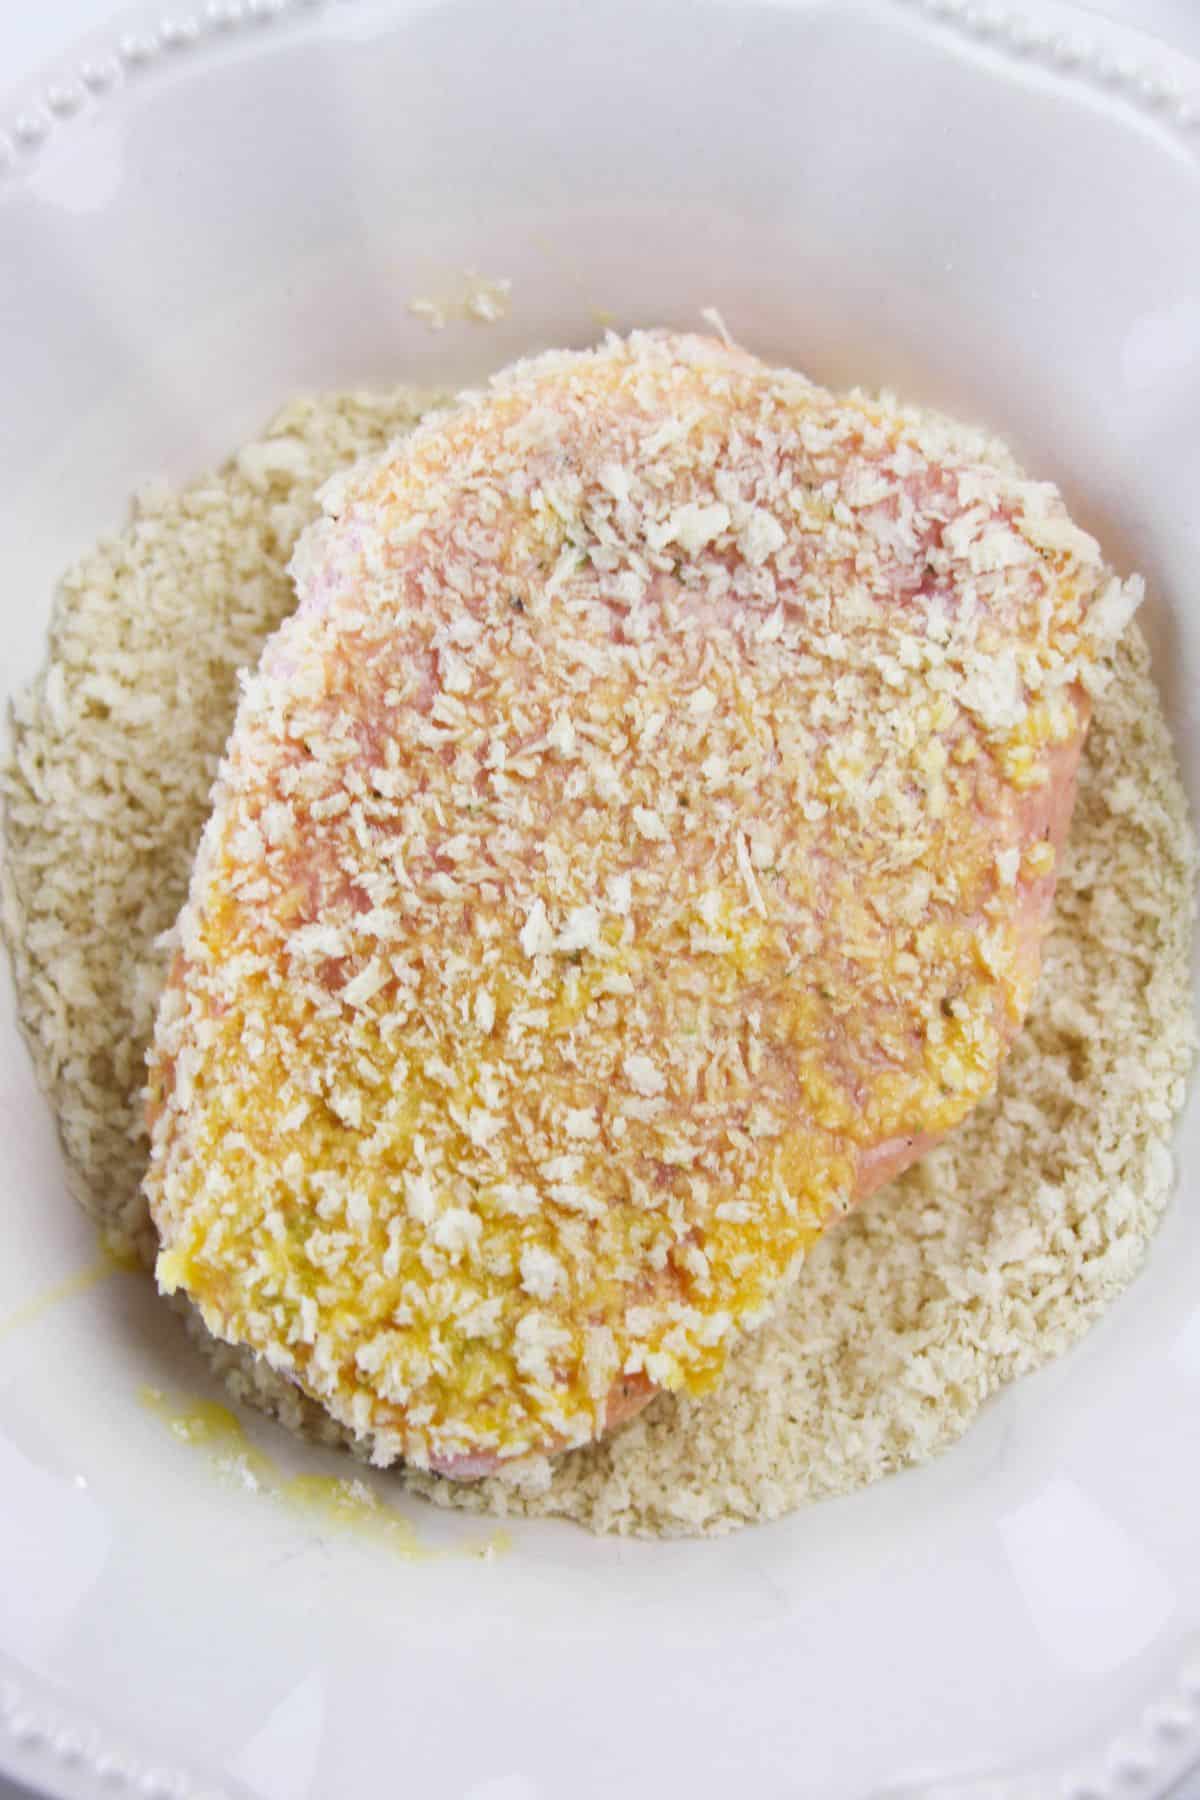 A pork chop coated with flour mixture, egg and bread crumbs.